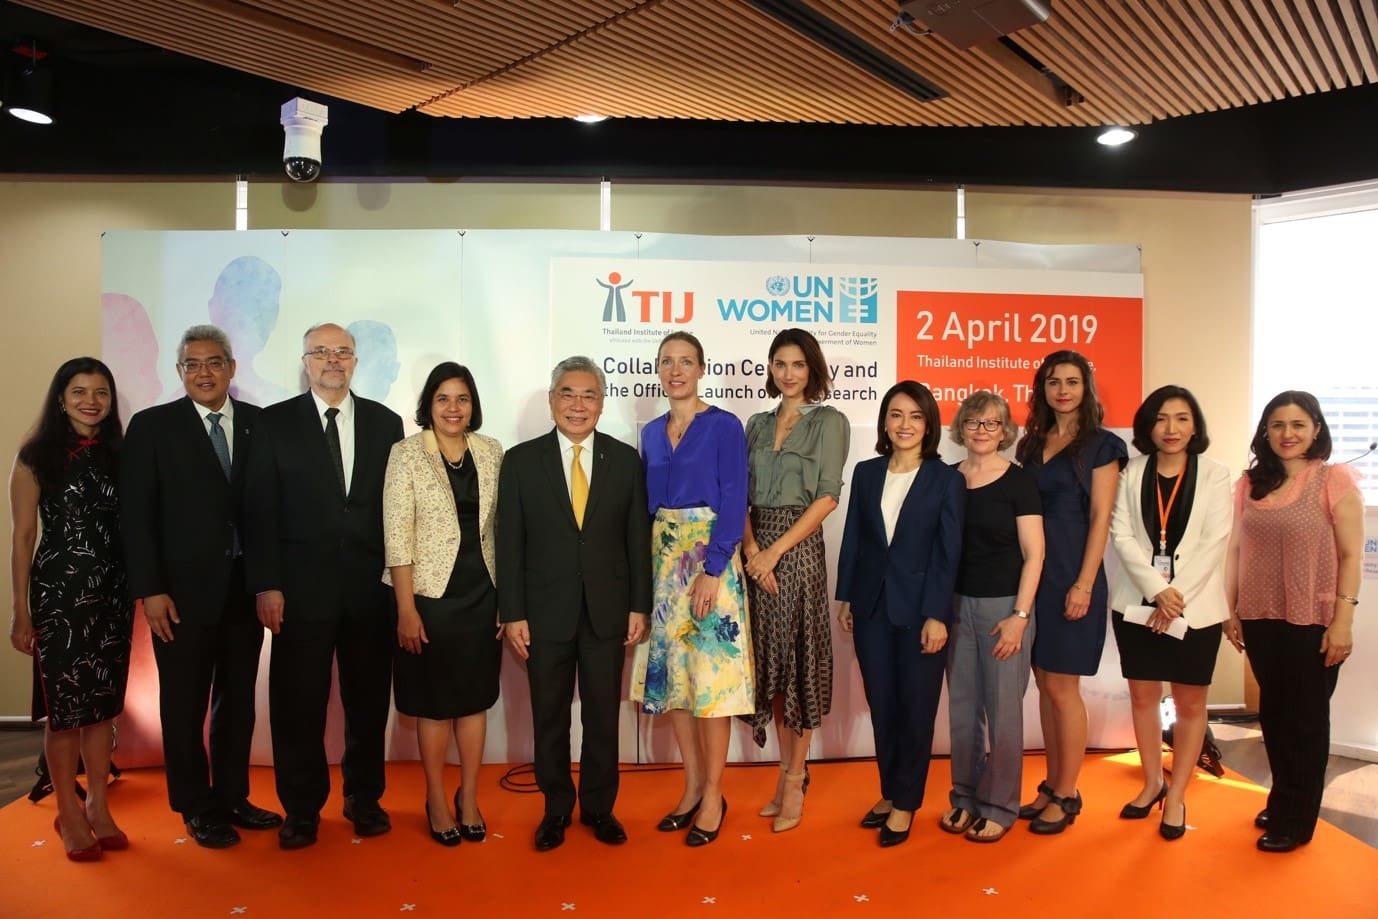 TIJ-UN Women Collaboration Ceremony and the Official Launch of TIJ Research